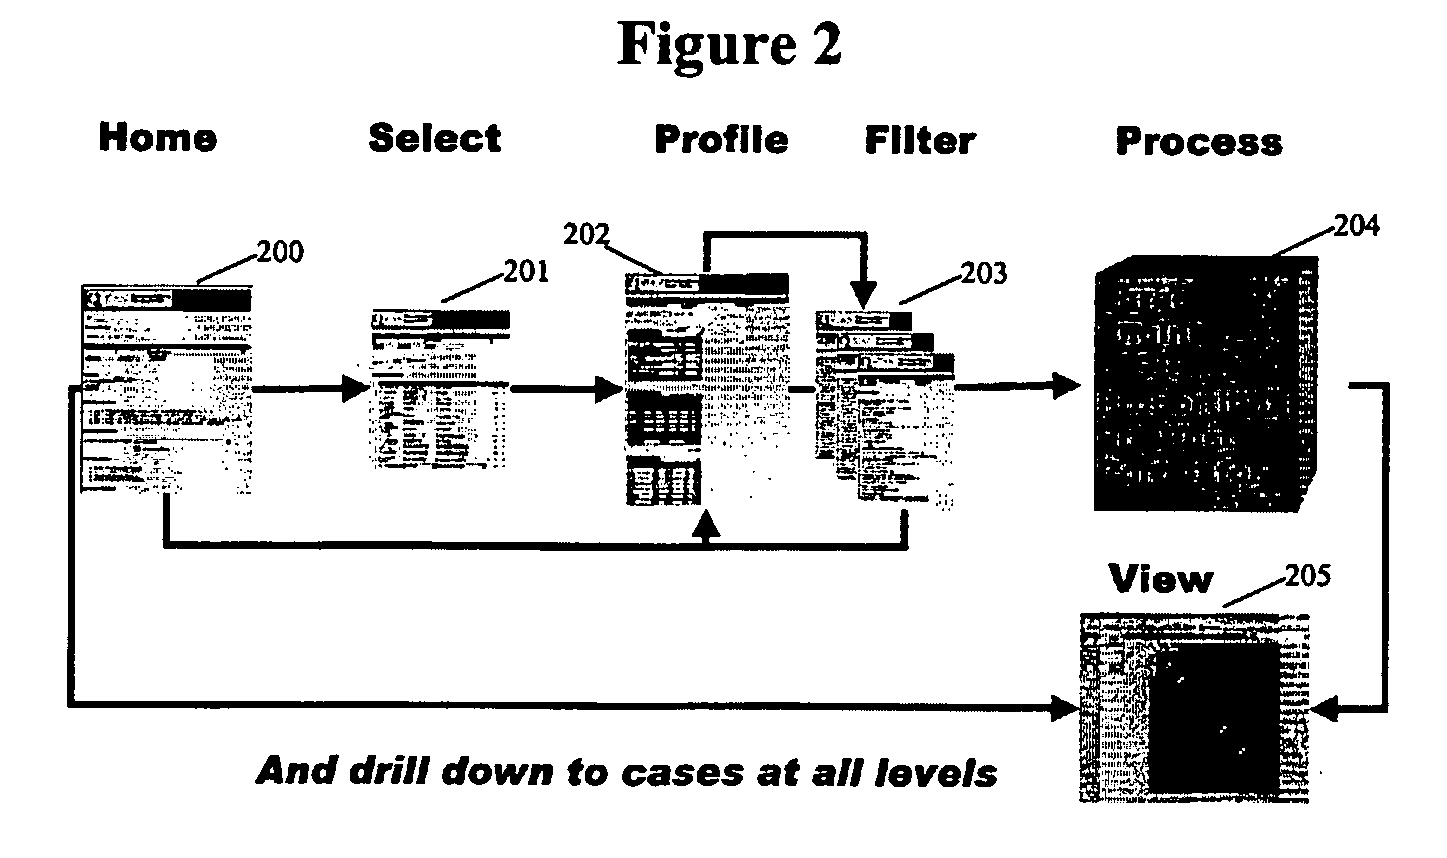 Method for graphically depicting drug adverse effect risks